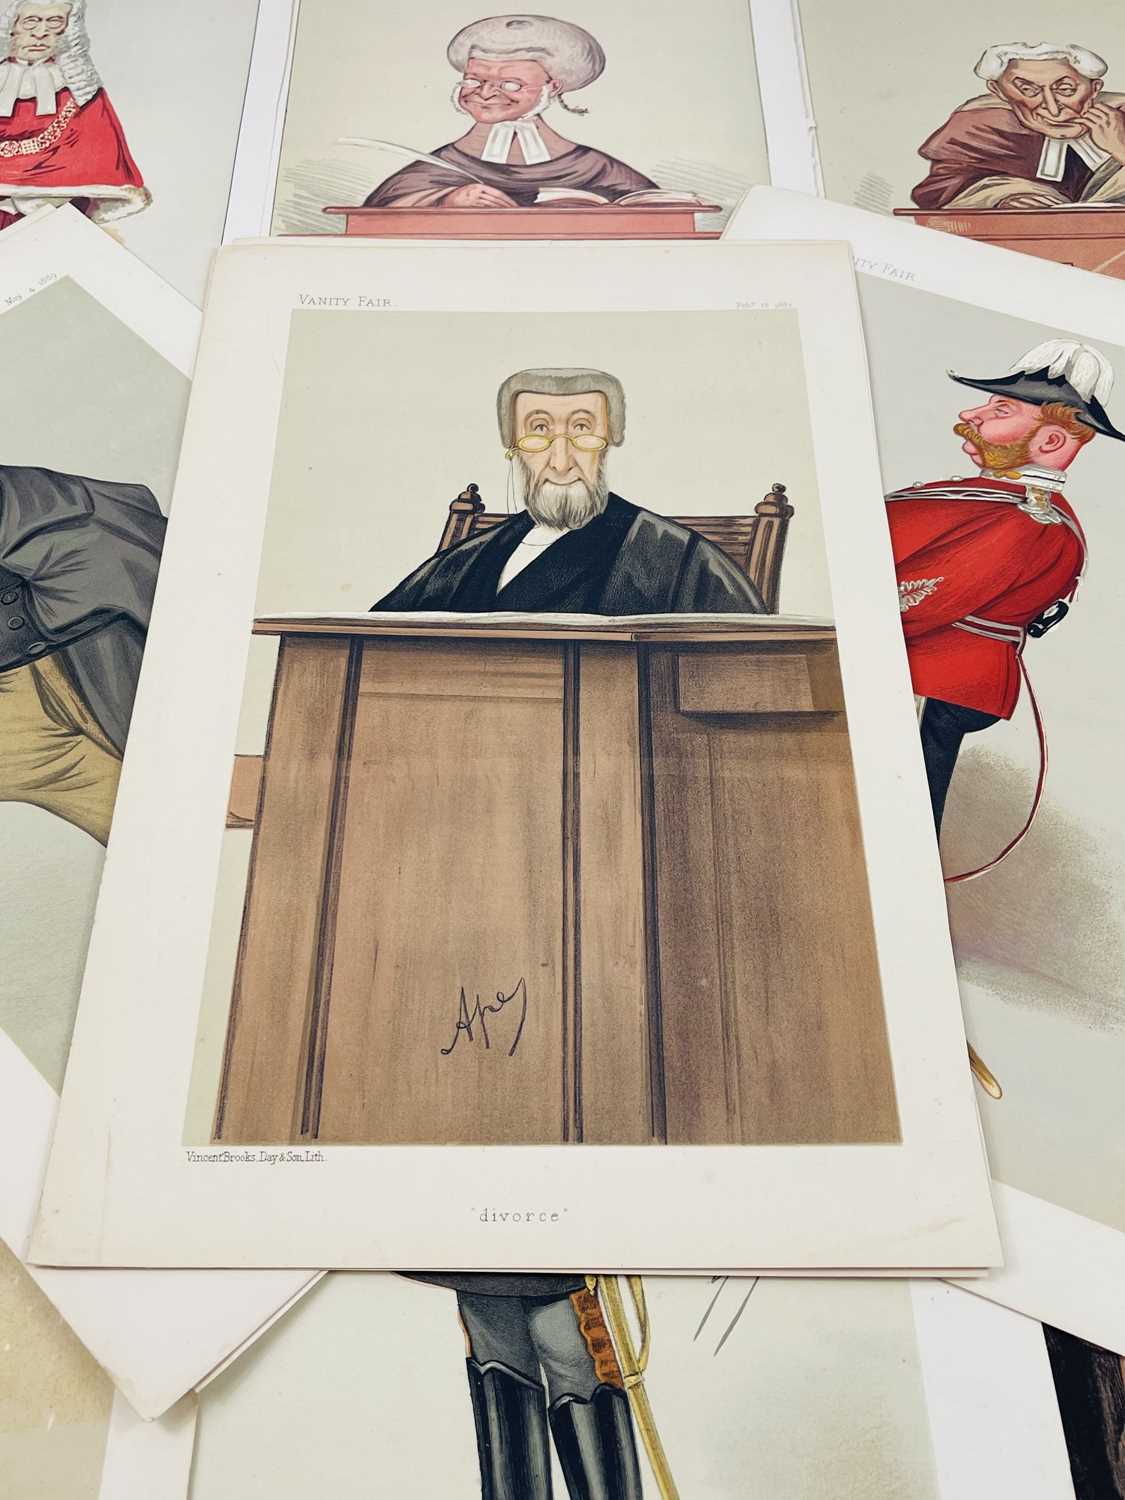 VANITY FAIR Interest. Twenty coloured lithographic plates of Generals, Judges and politicians, - Image 3 of 4